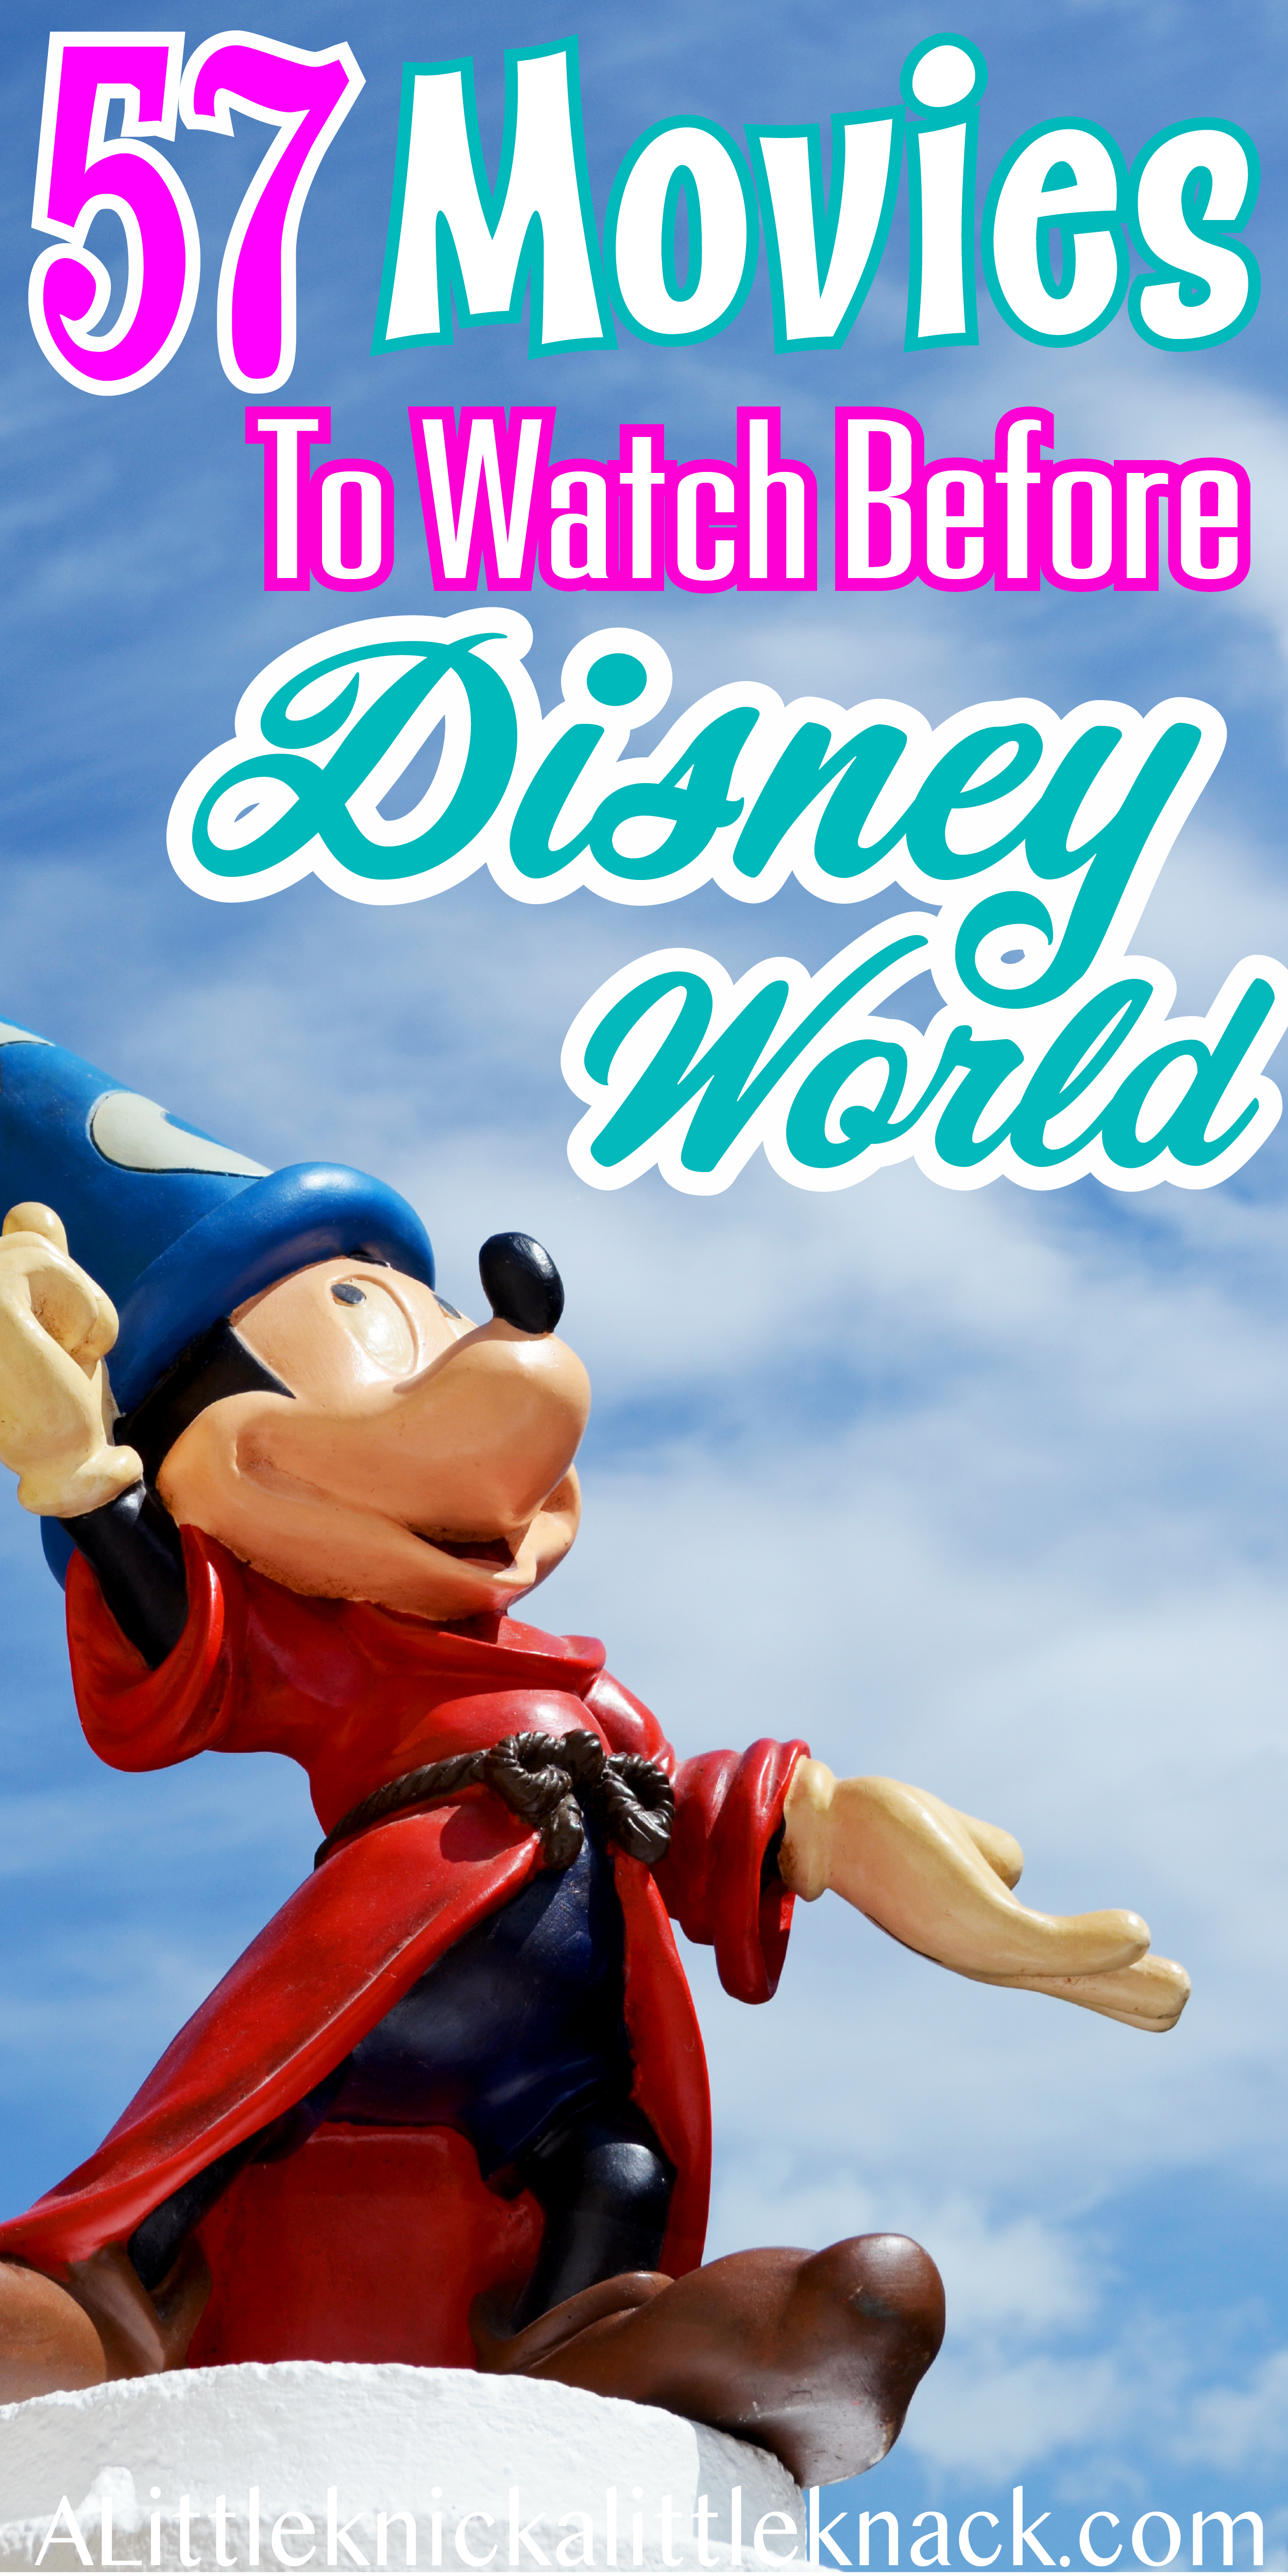 Wizard Mickey statue with text overlay